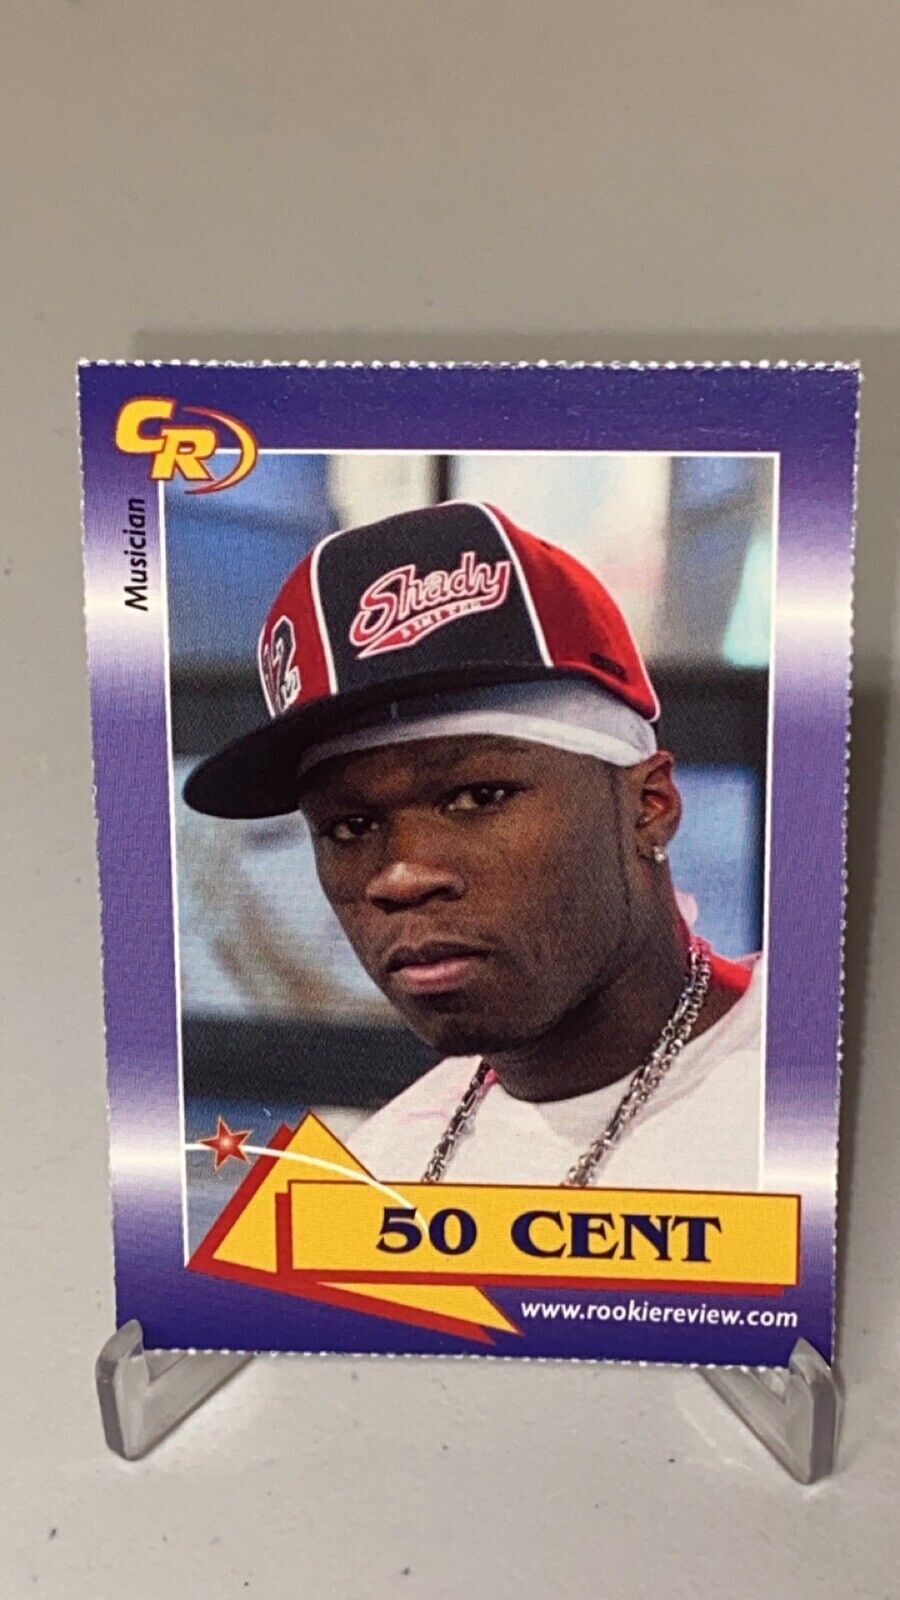 2003 Celebrity Review Rookie Review 50 Cent Rapper Musician Card #10